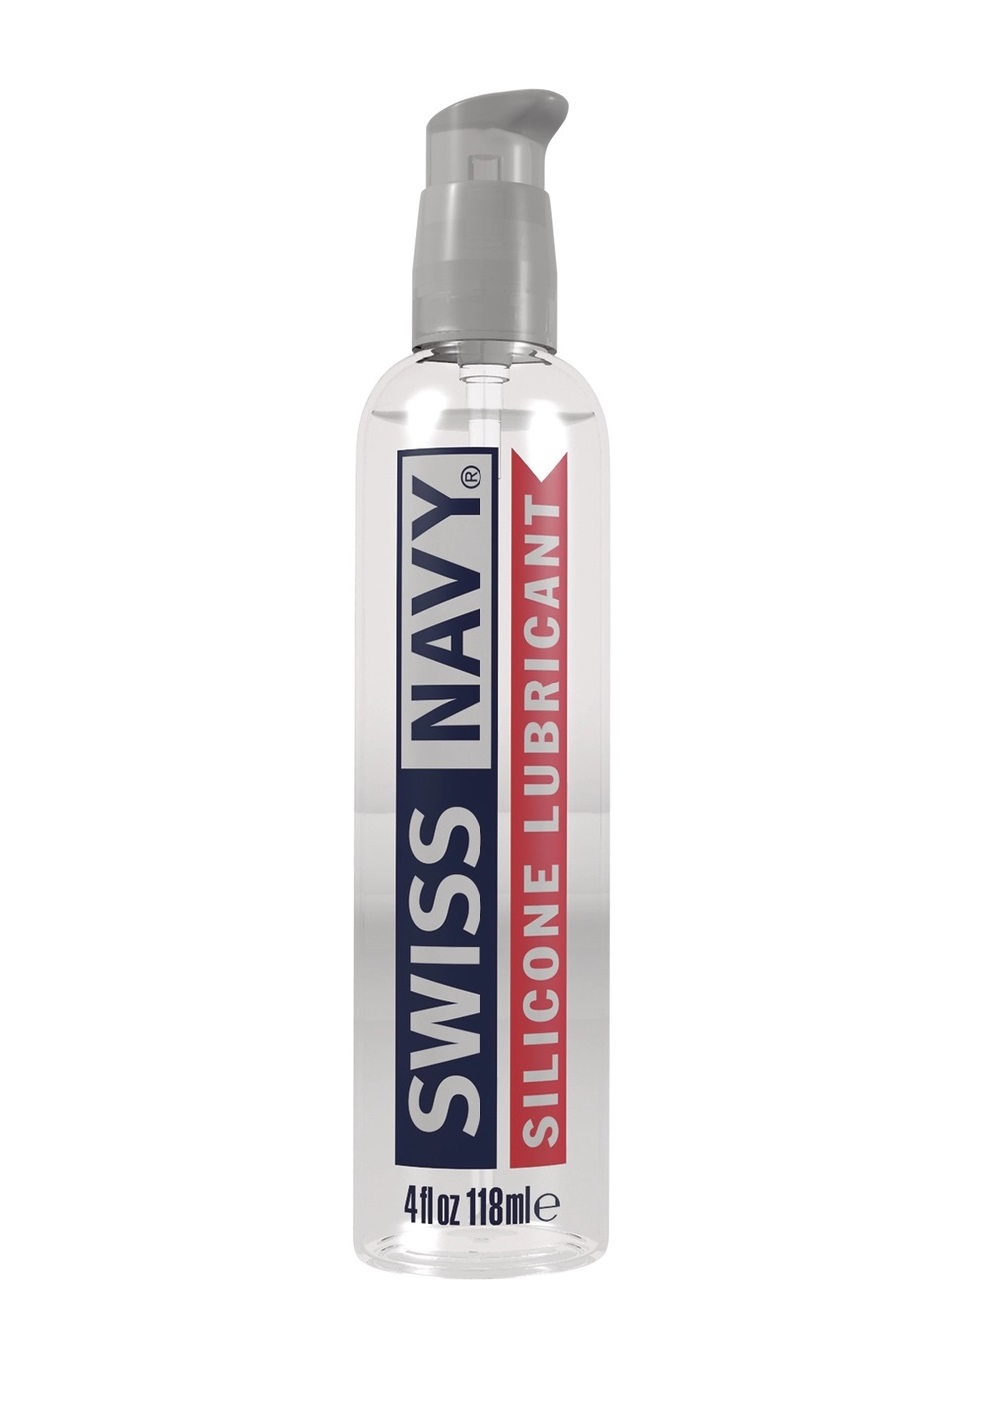 Swiss Navy Silicone Lube.